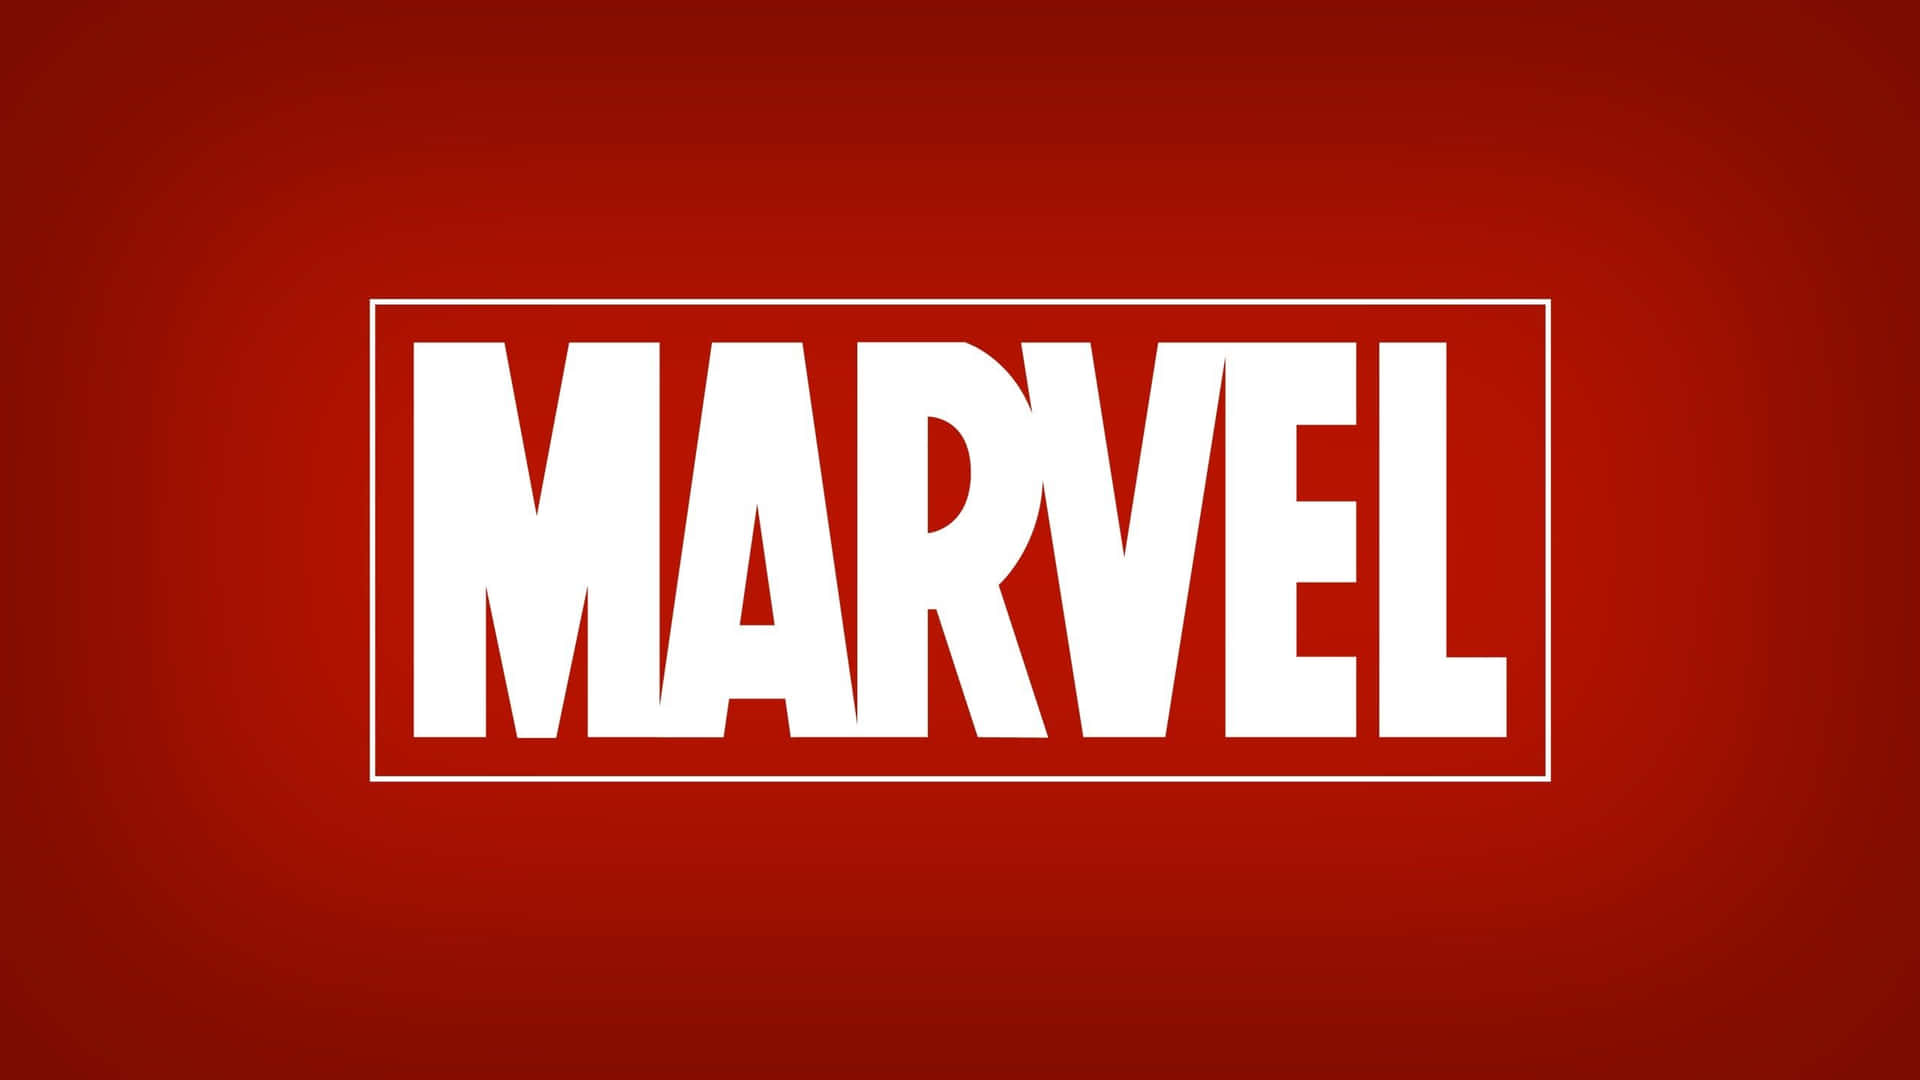 Marvel Comics Logo on a Colorful Background Wallpaper